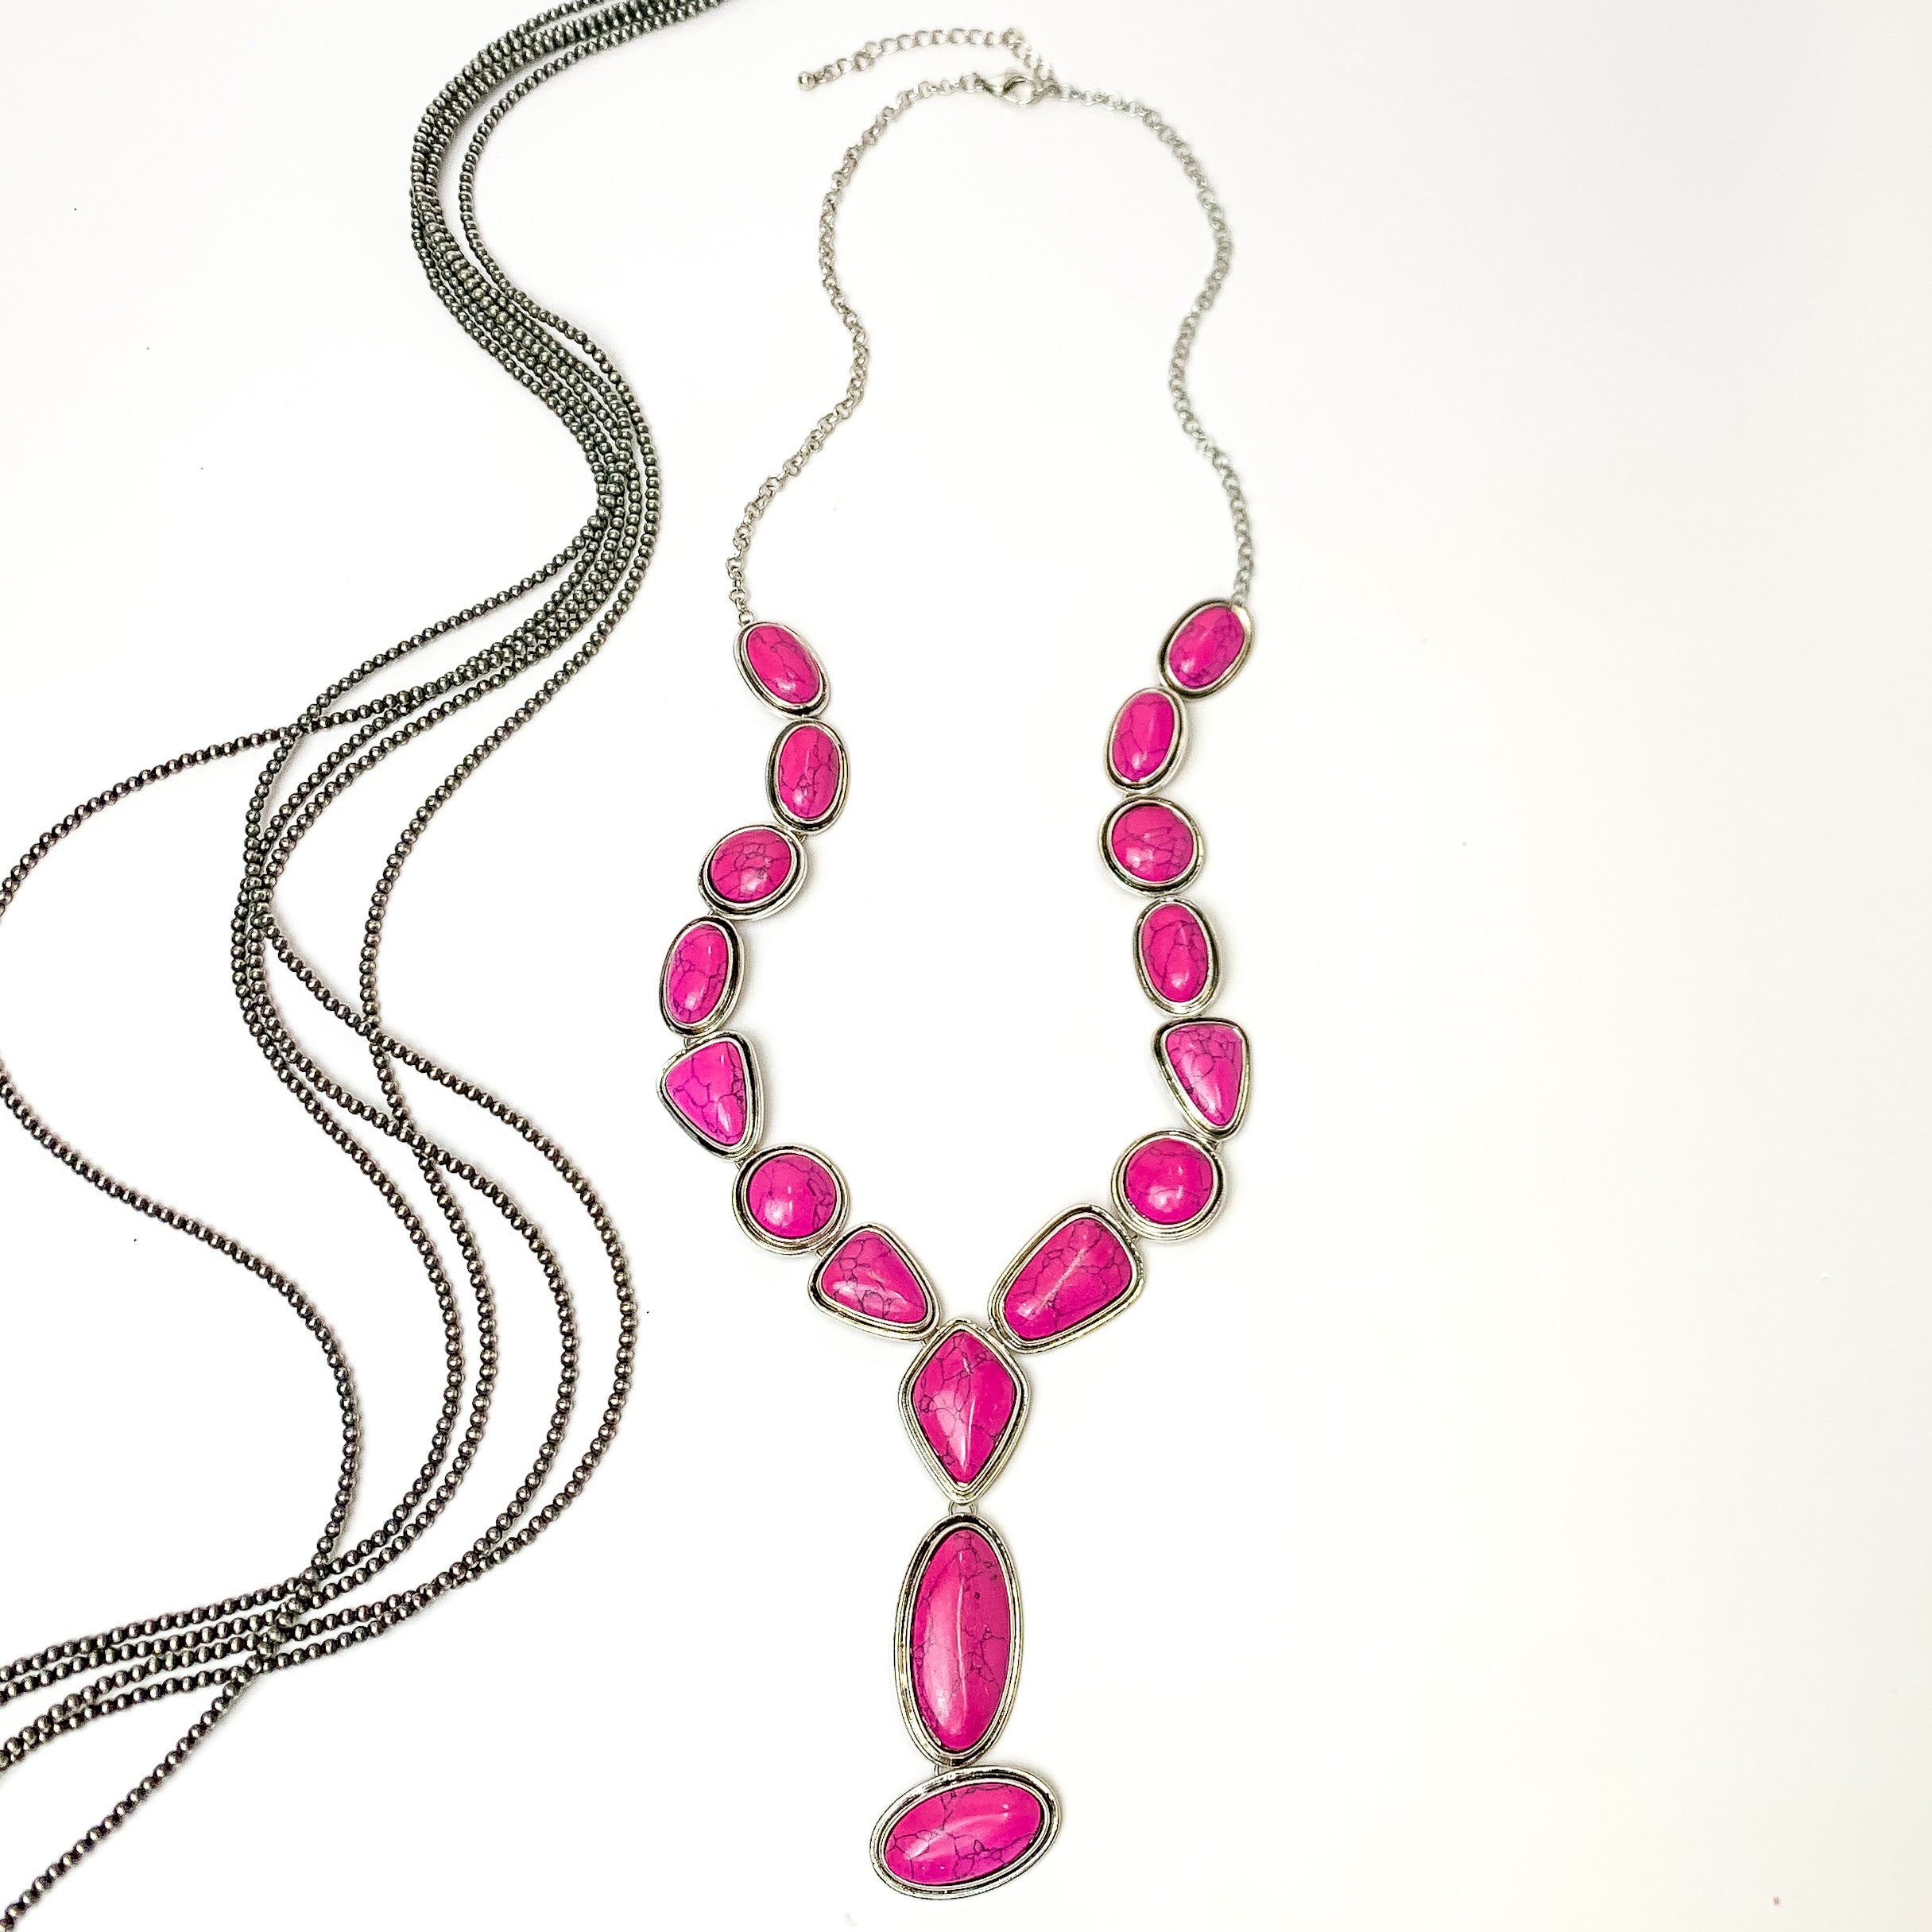 Western Lariat Necklace with Fuchsia Pink Stones - Giddy Up Glamour Boutique